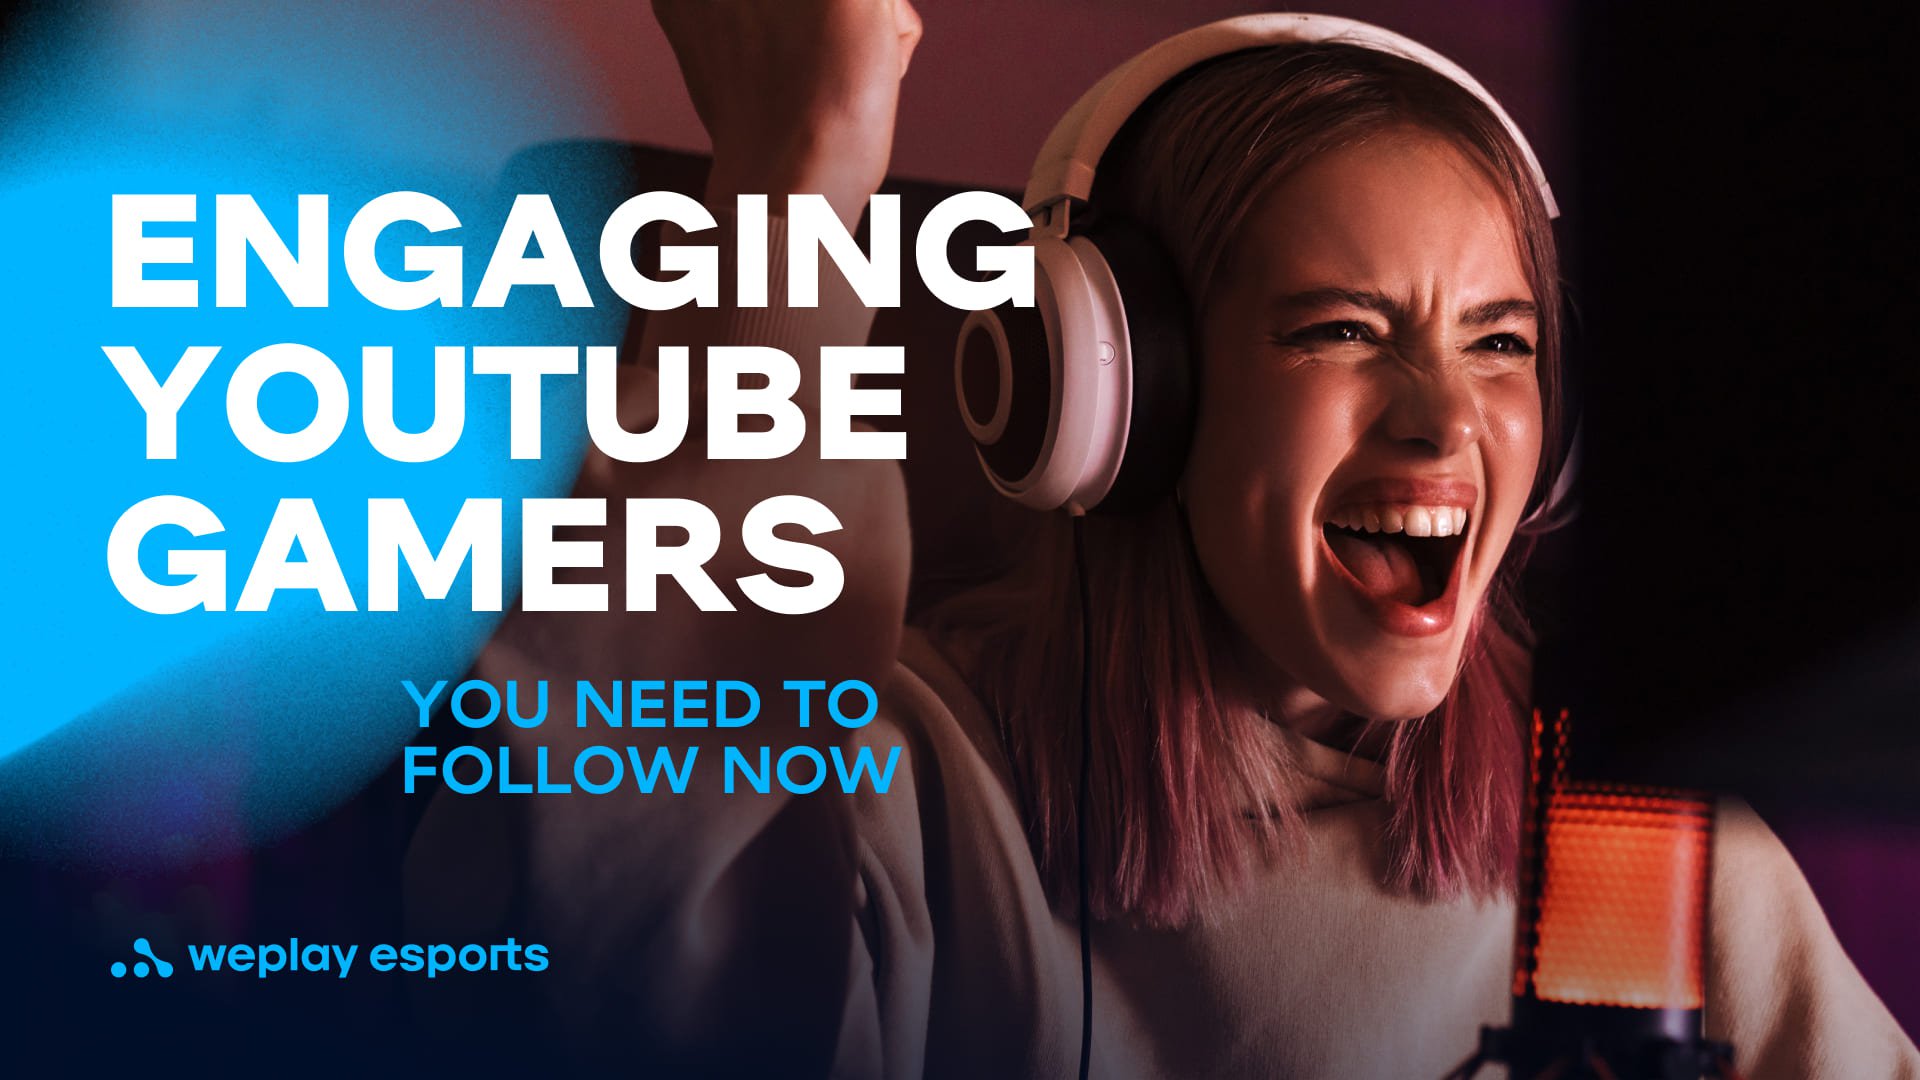 Engaging YouTube gamers you need to follow now. Credit: WePlay Holding